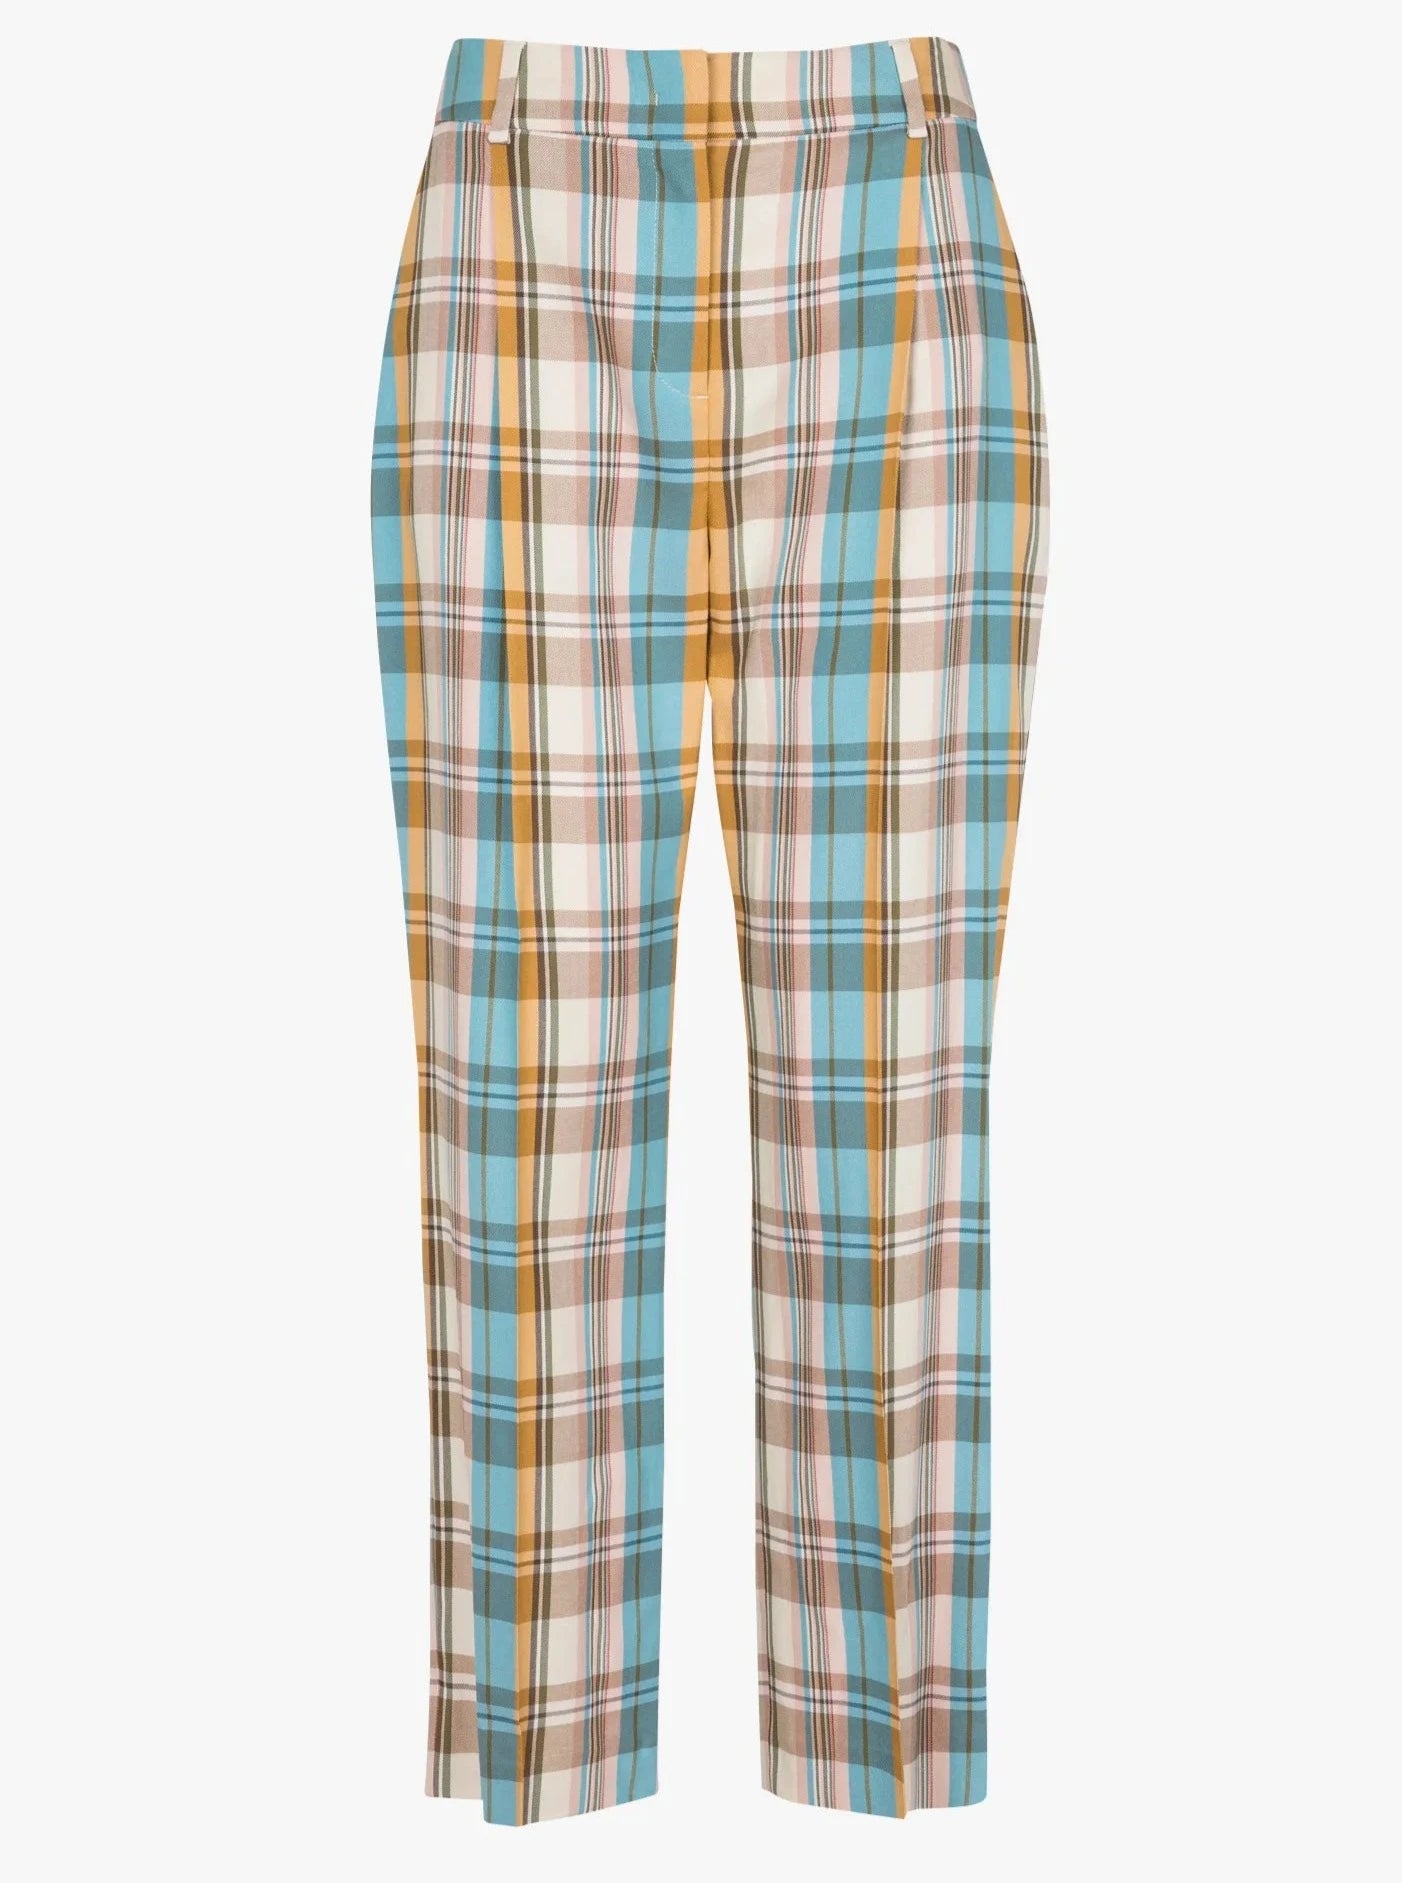 Paul Smith Check Trousers